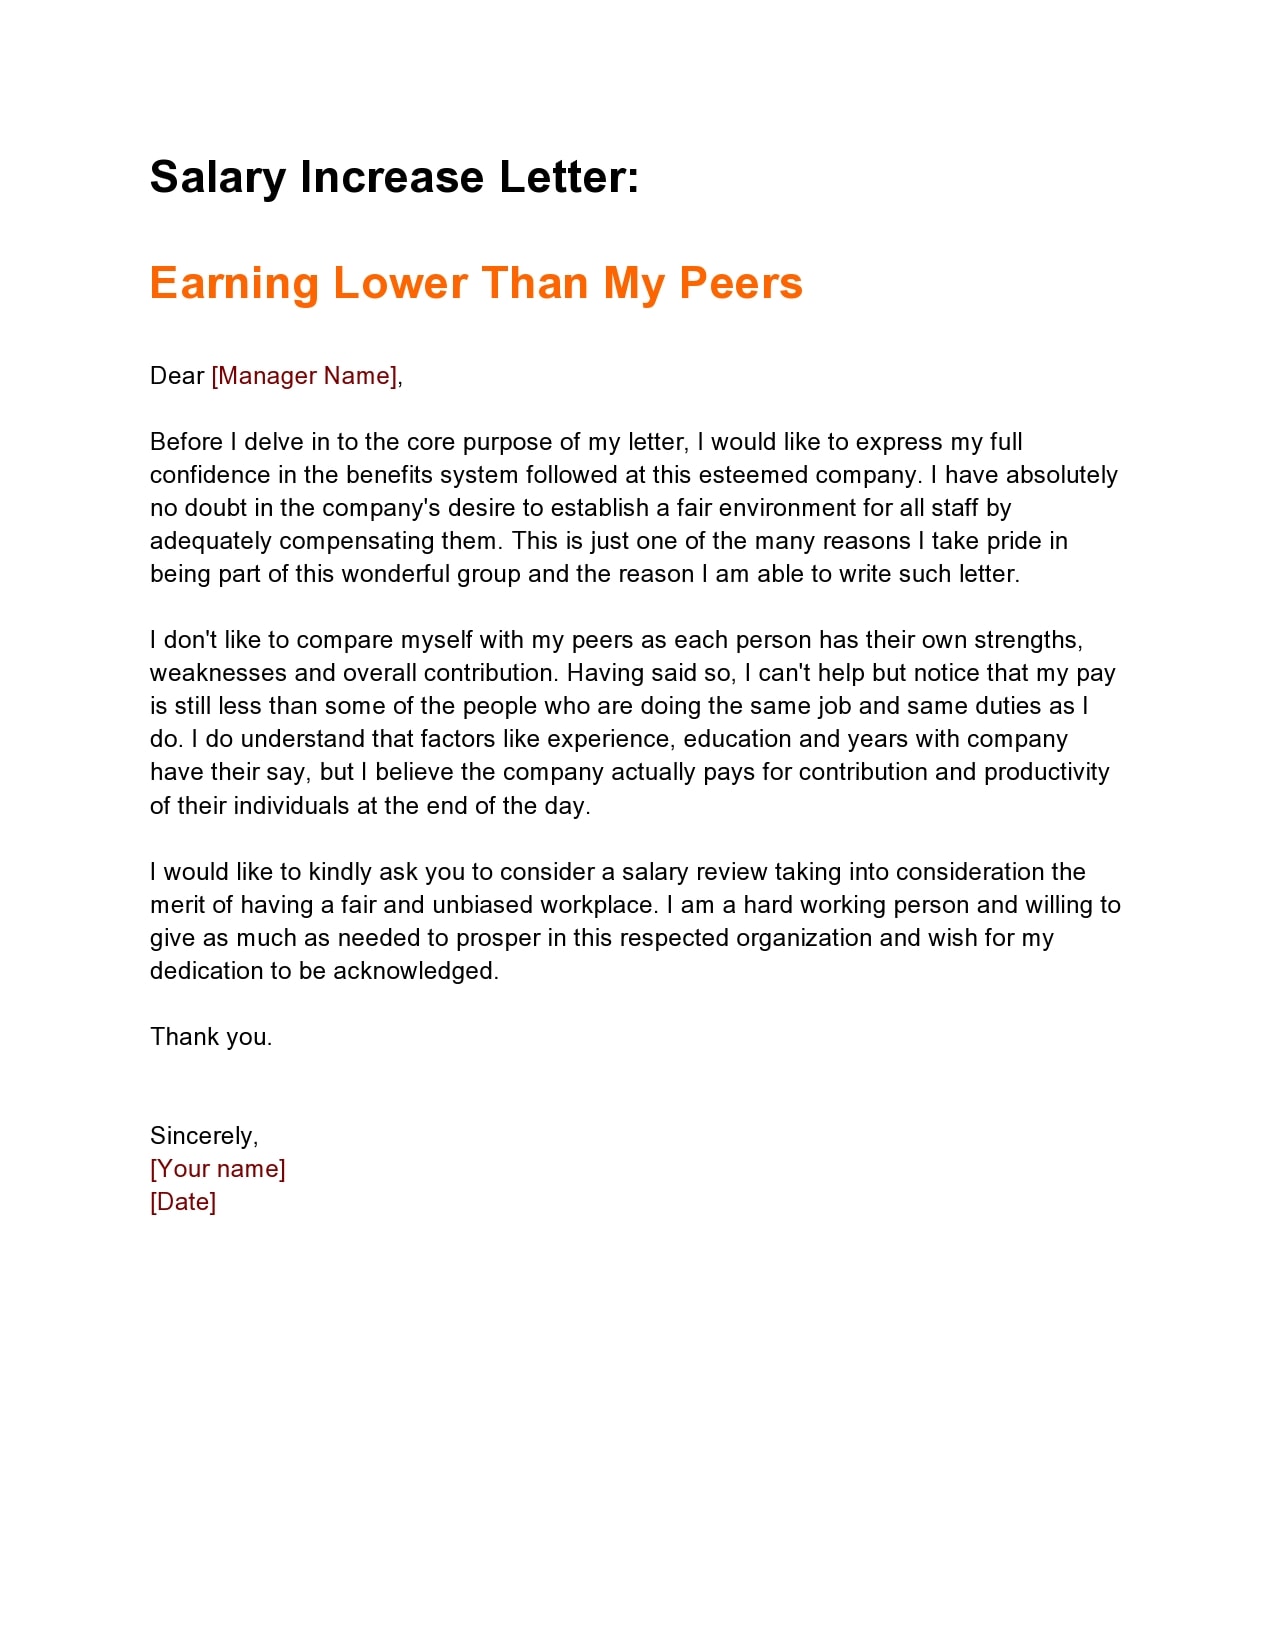 20 Effective Salary Increase Letters & Samples - TemplateArchive Within Request For Raise Letter Template